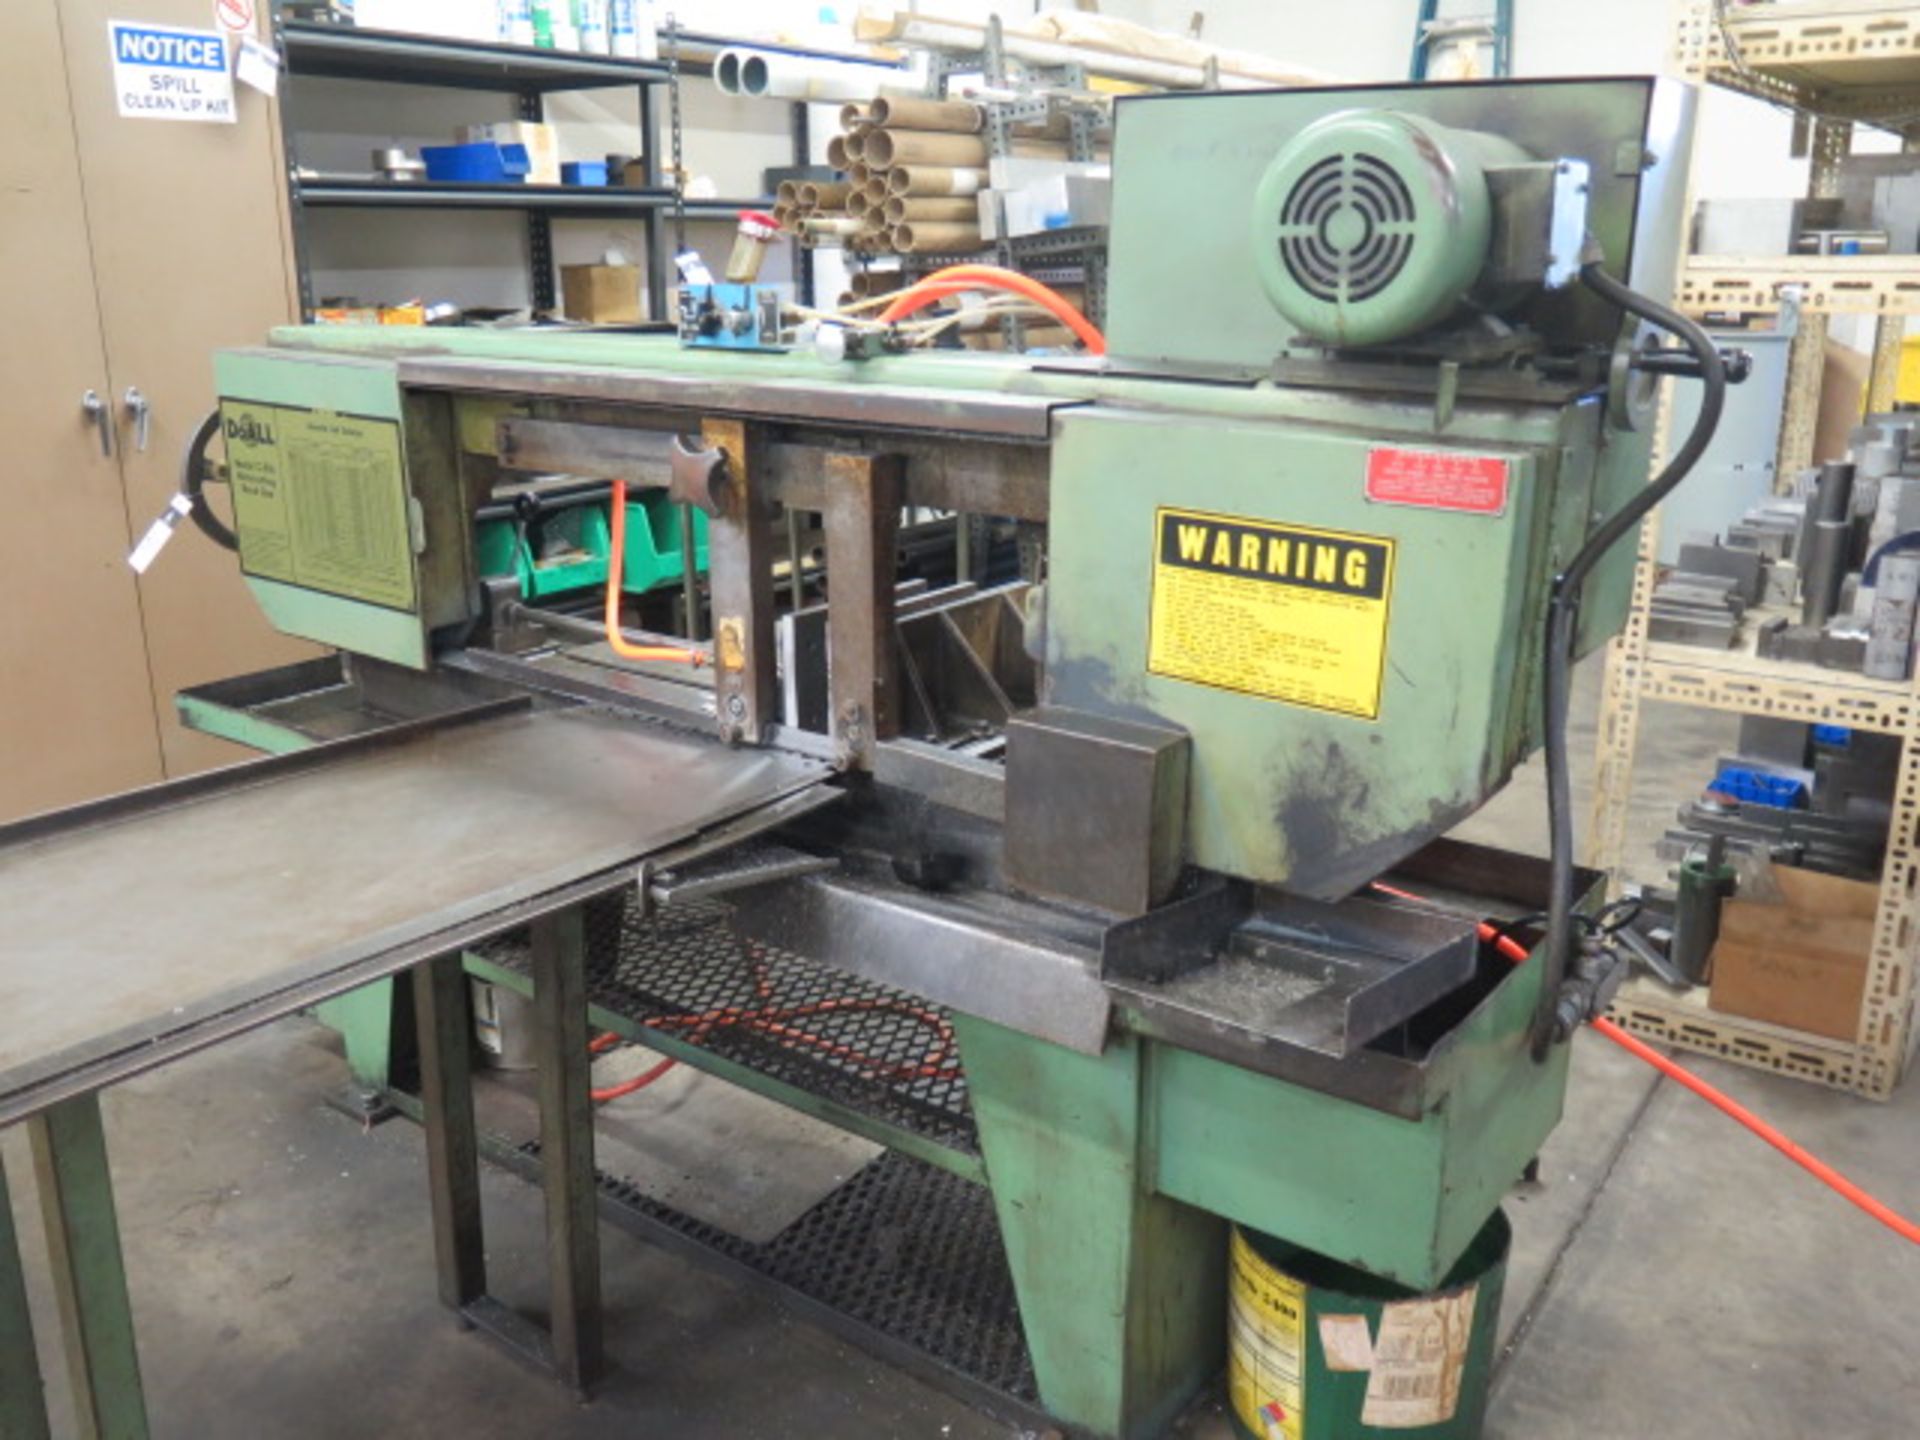 DoAll C-916 9" Horizontal Band Saw s/n 438-871464 w/ Speed Clamping, Coolant, Material Stand - Image 3 of 8